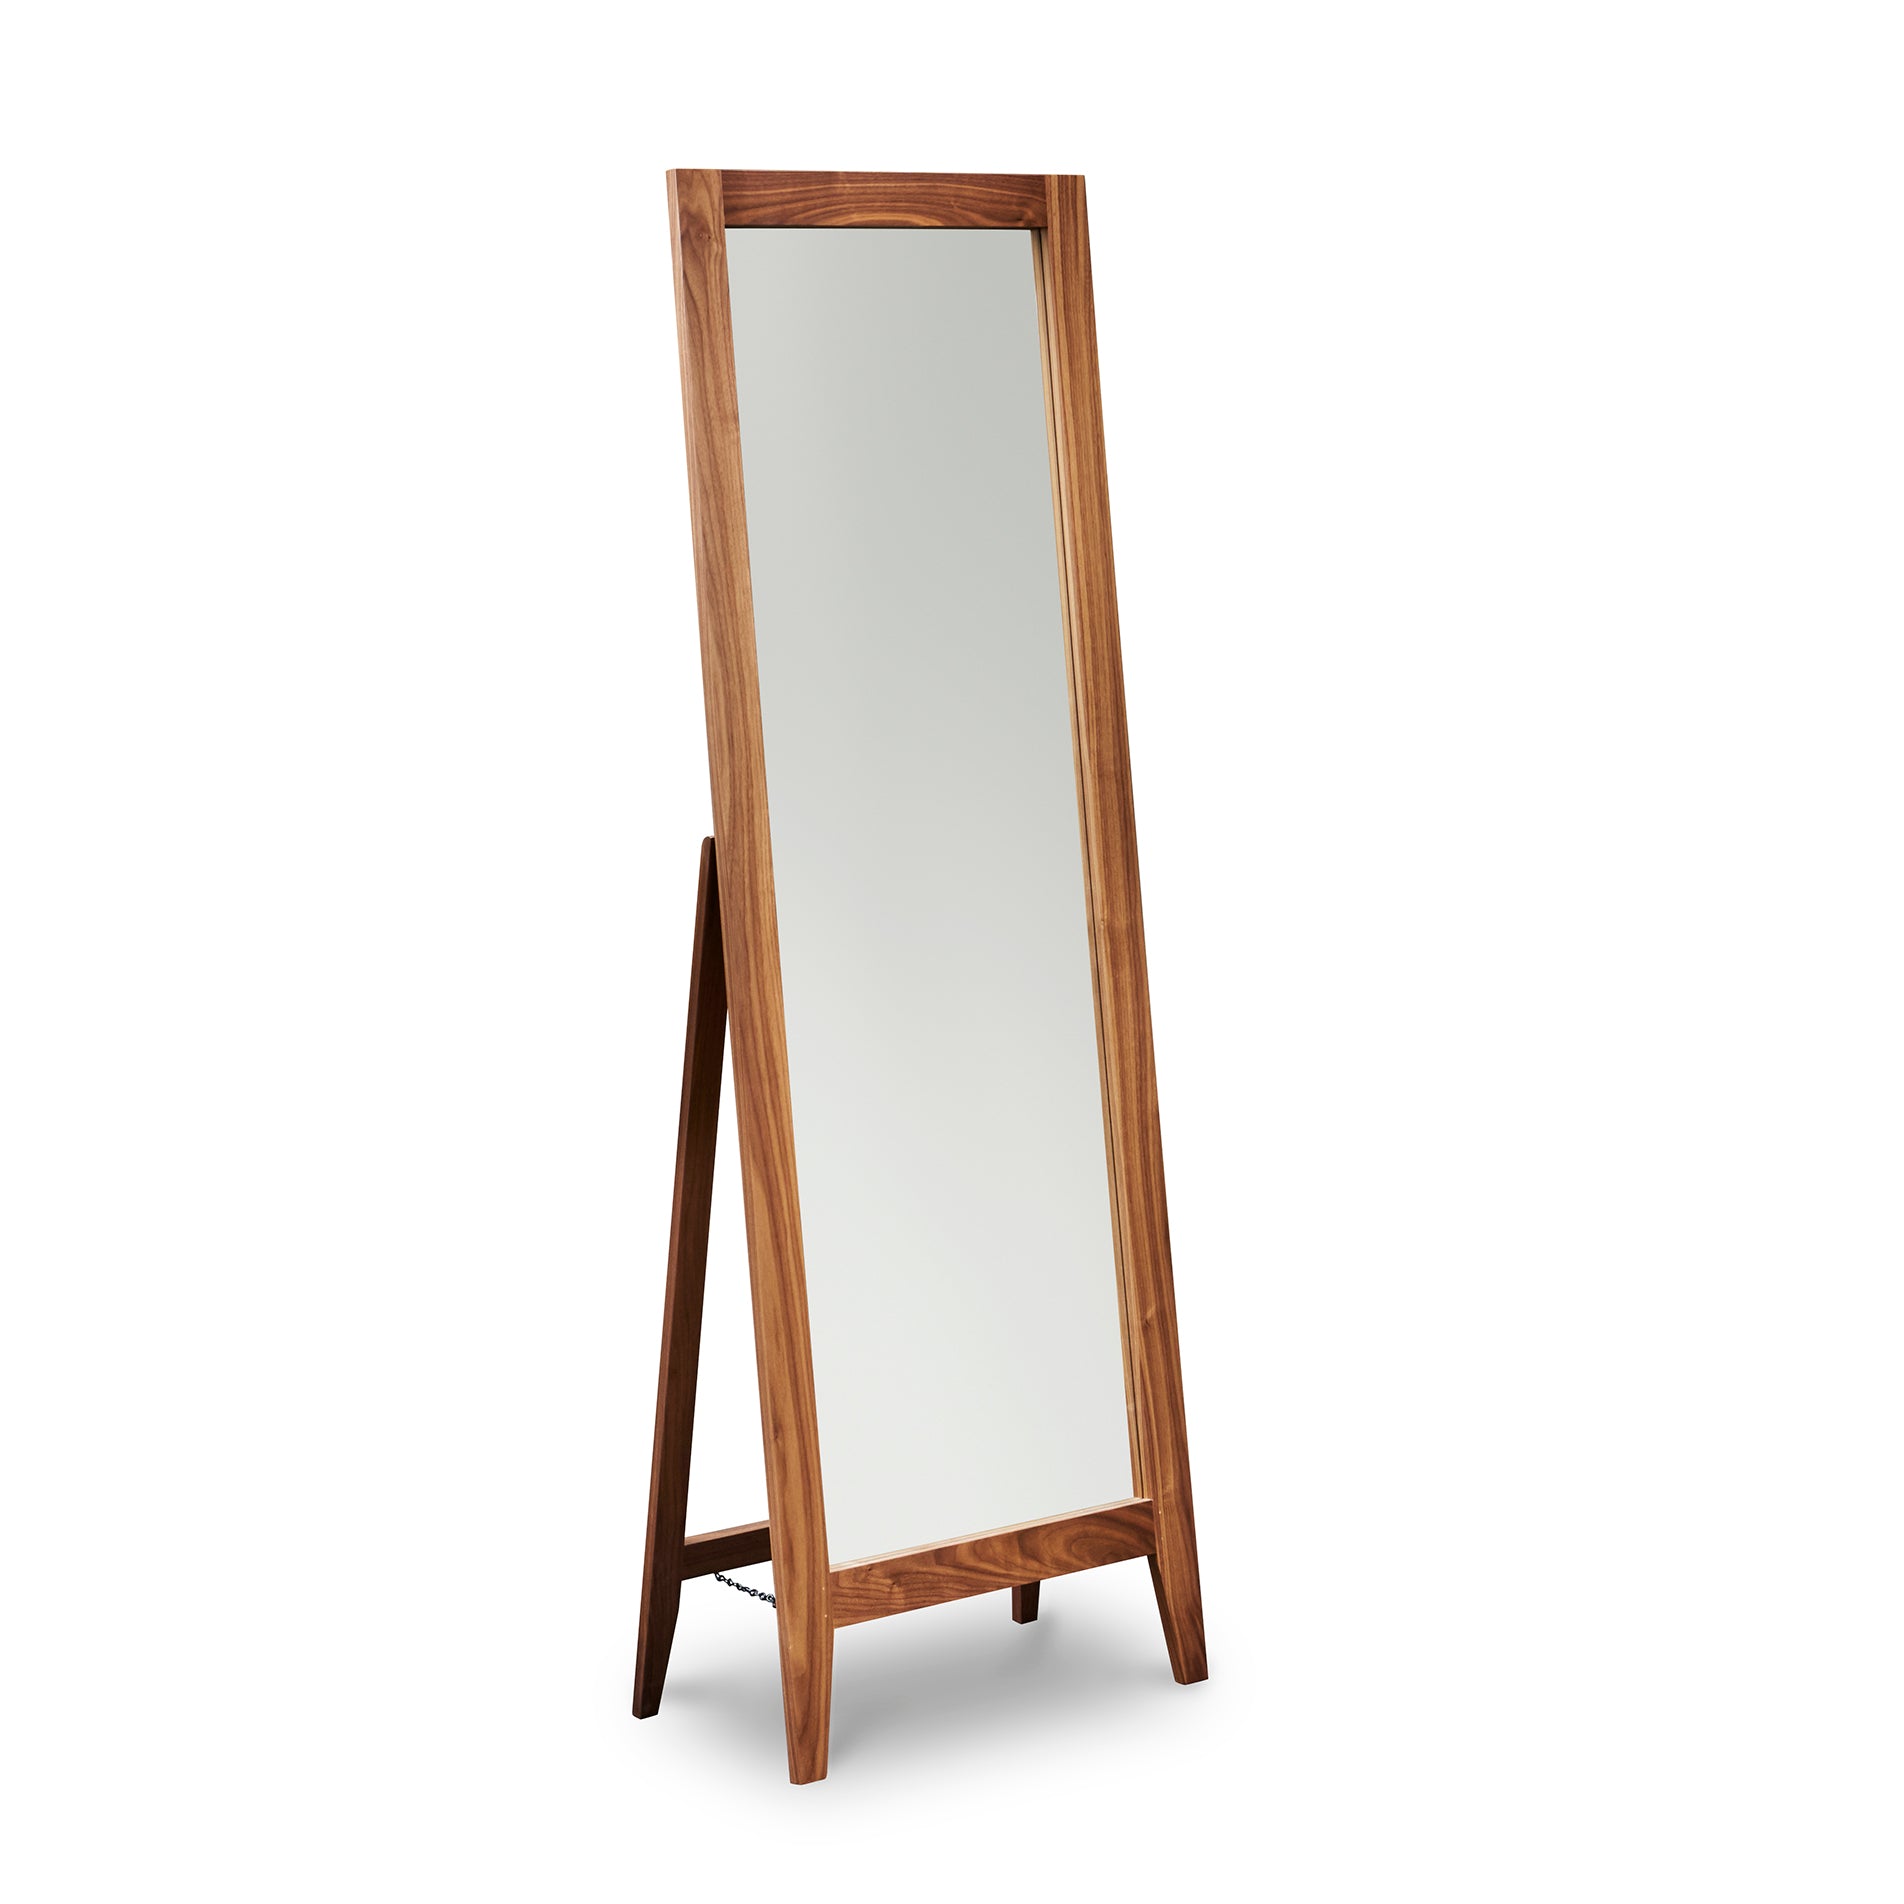 Floor Picture Frame Stands